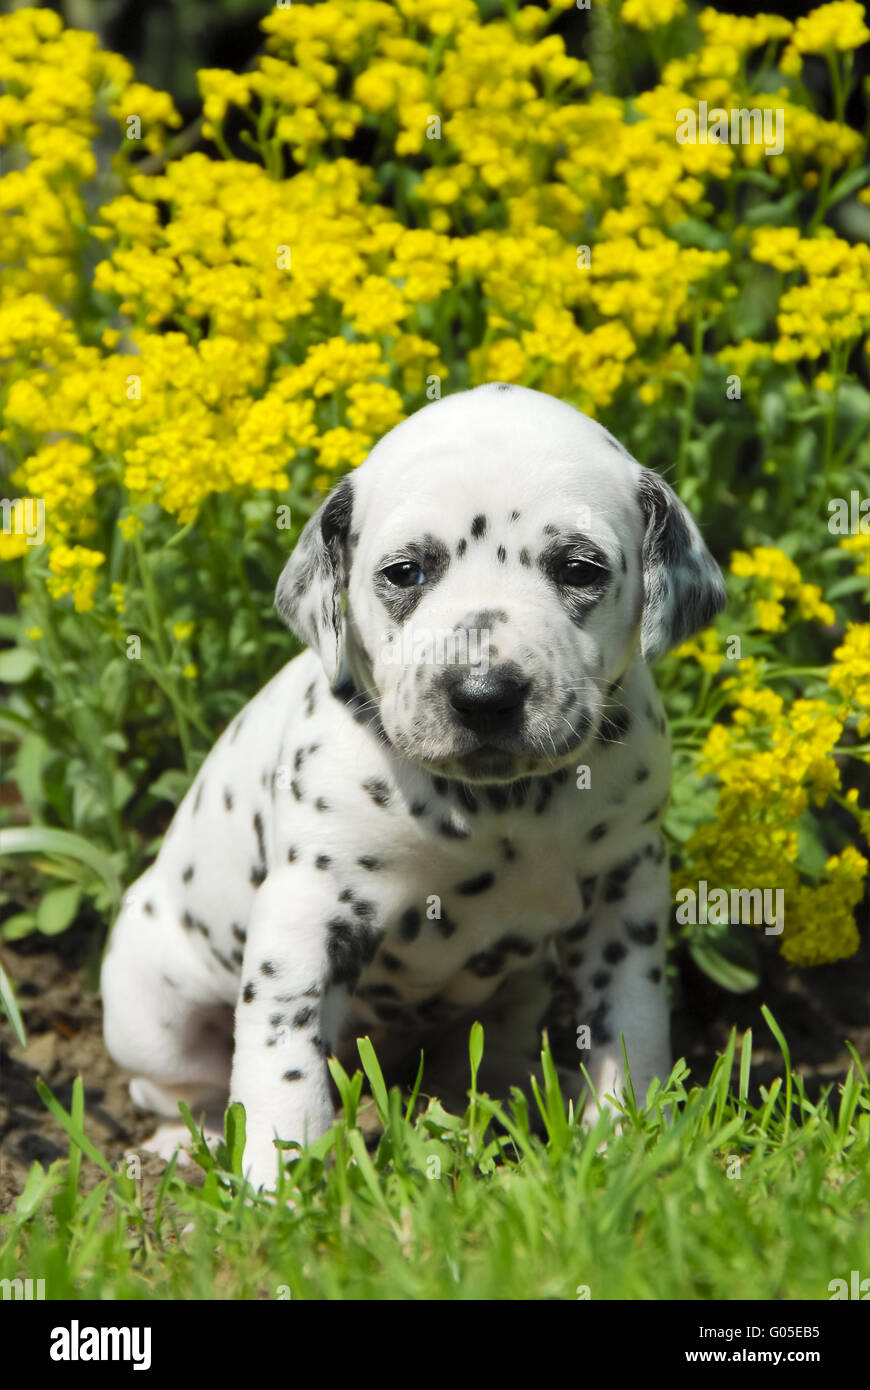 Dalmatian puppy, three weeks old, in a flowerbed Stock Photo